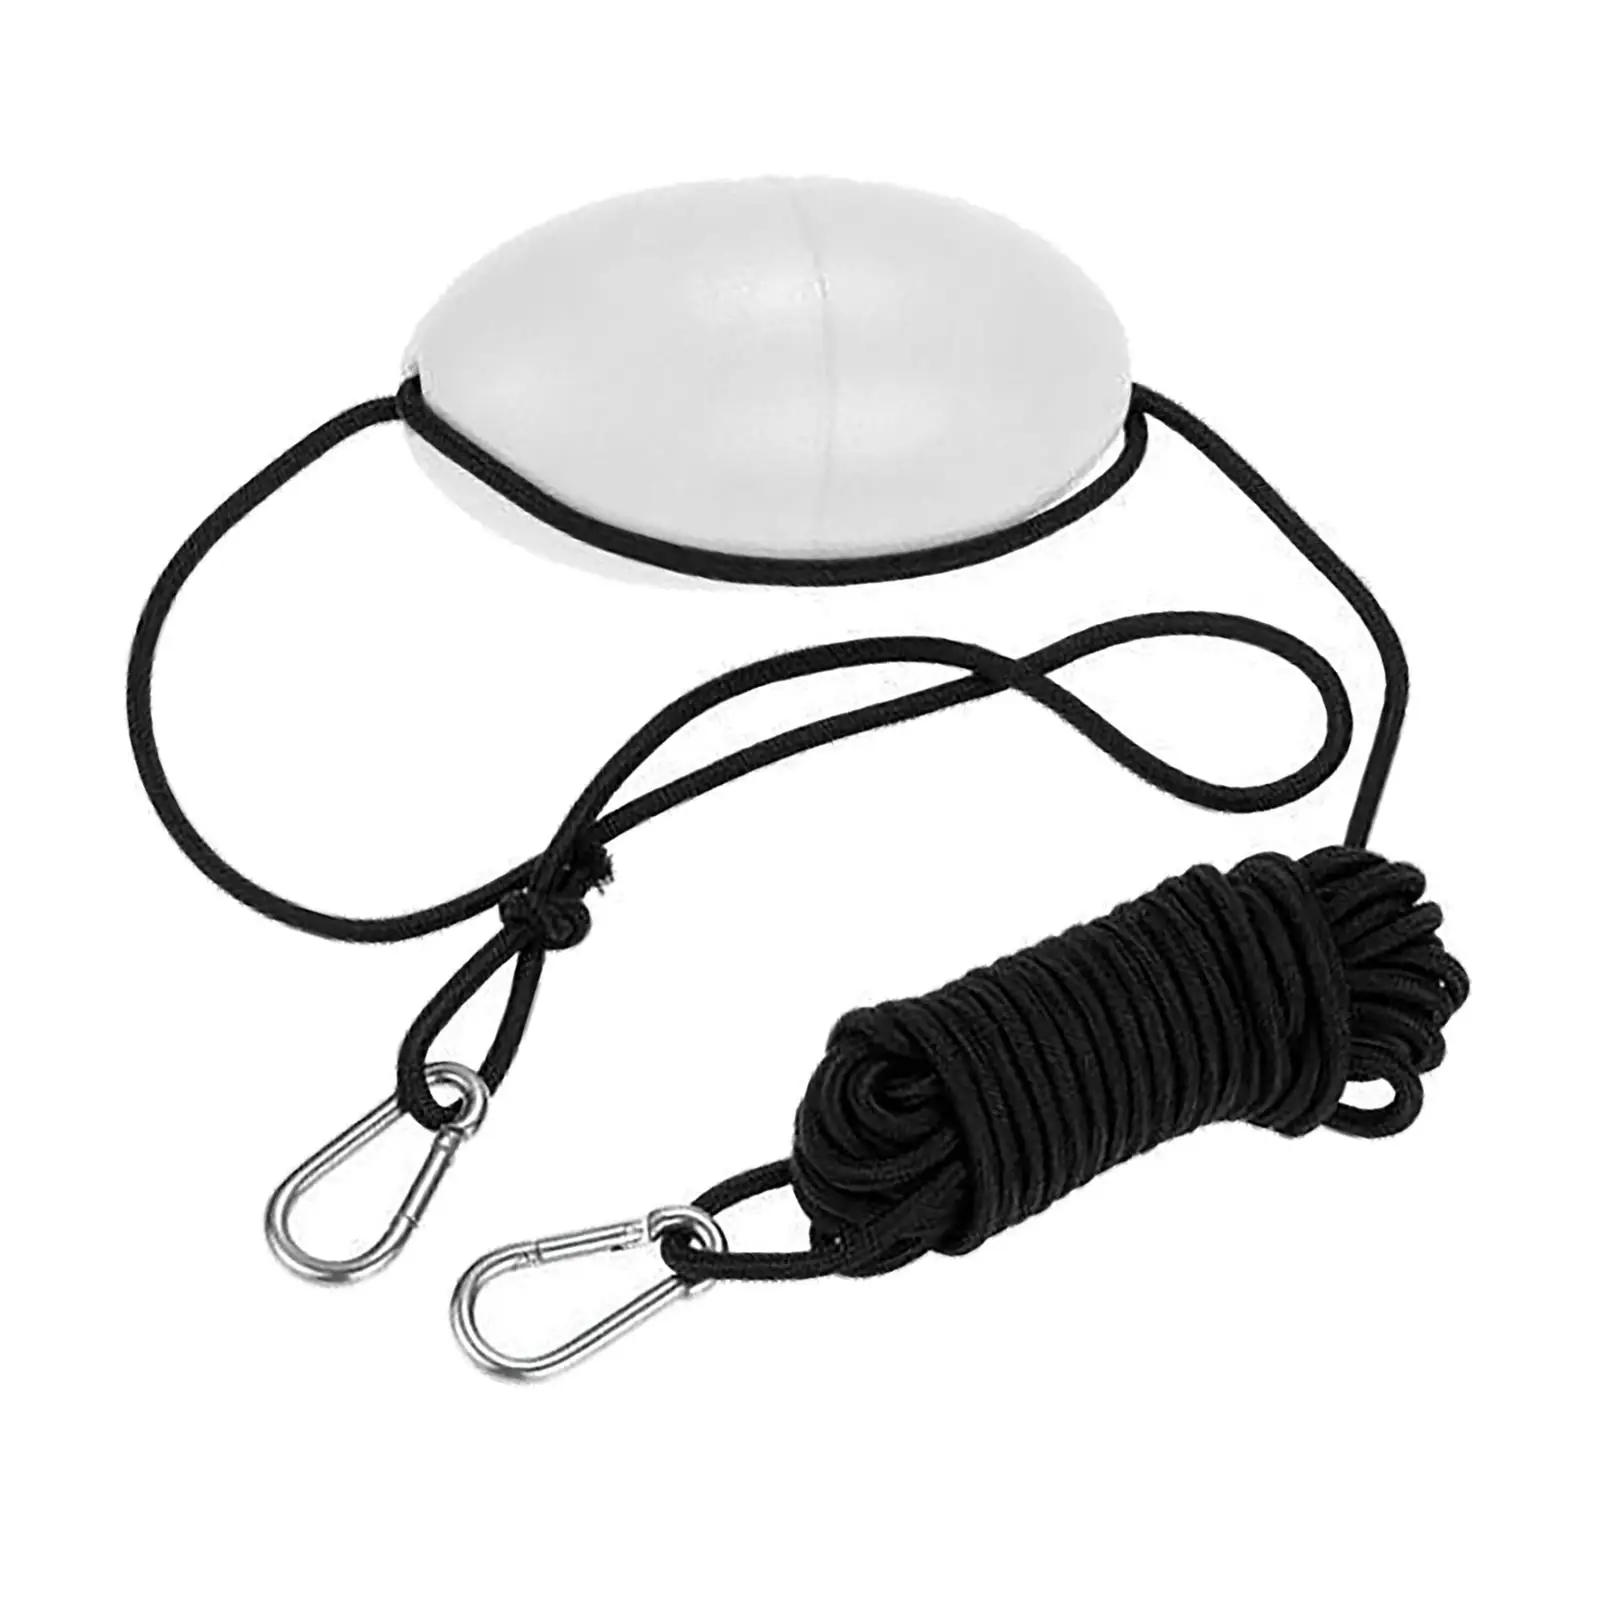  Anchor Rope W/ Anchor Buoy 9.1M Rope Length for Inflatable Boat